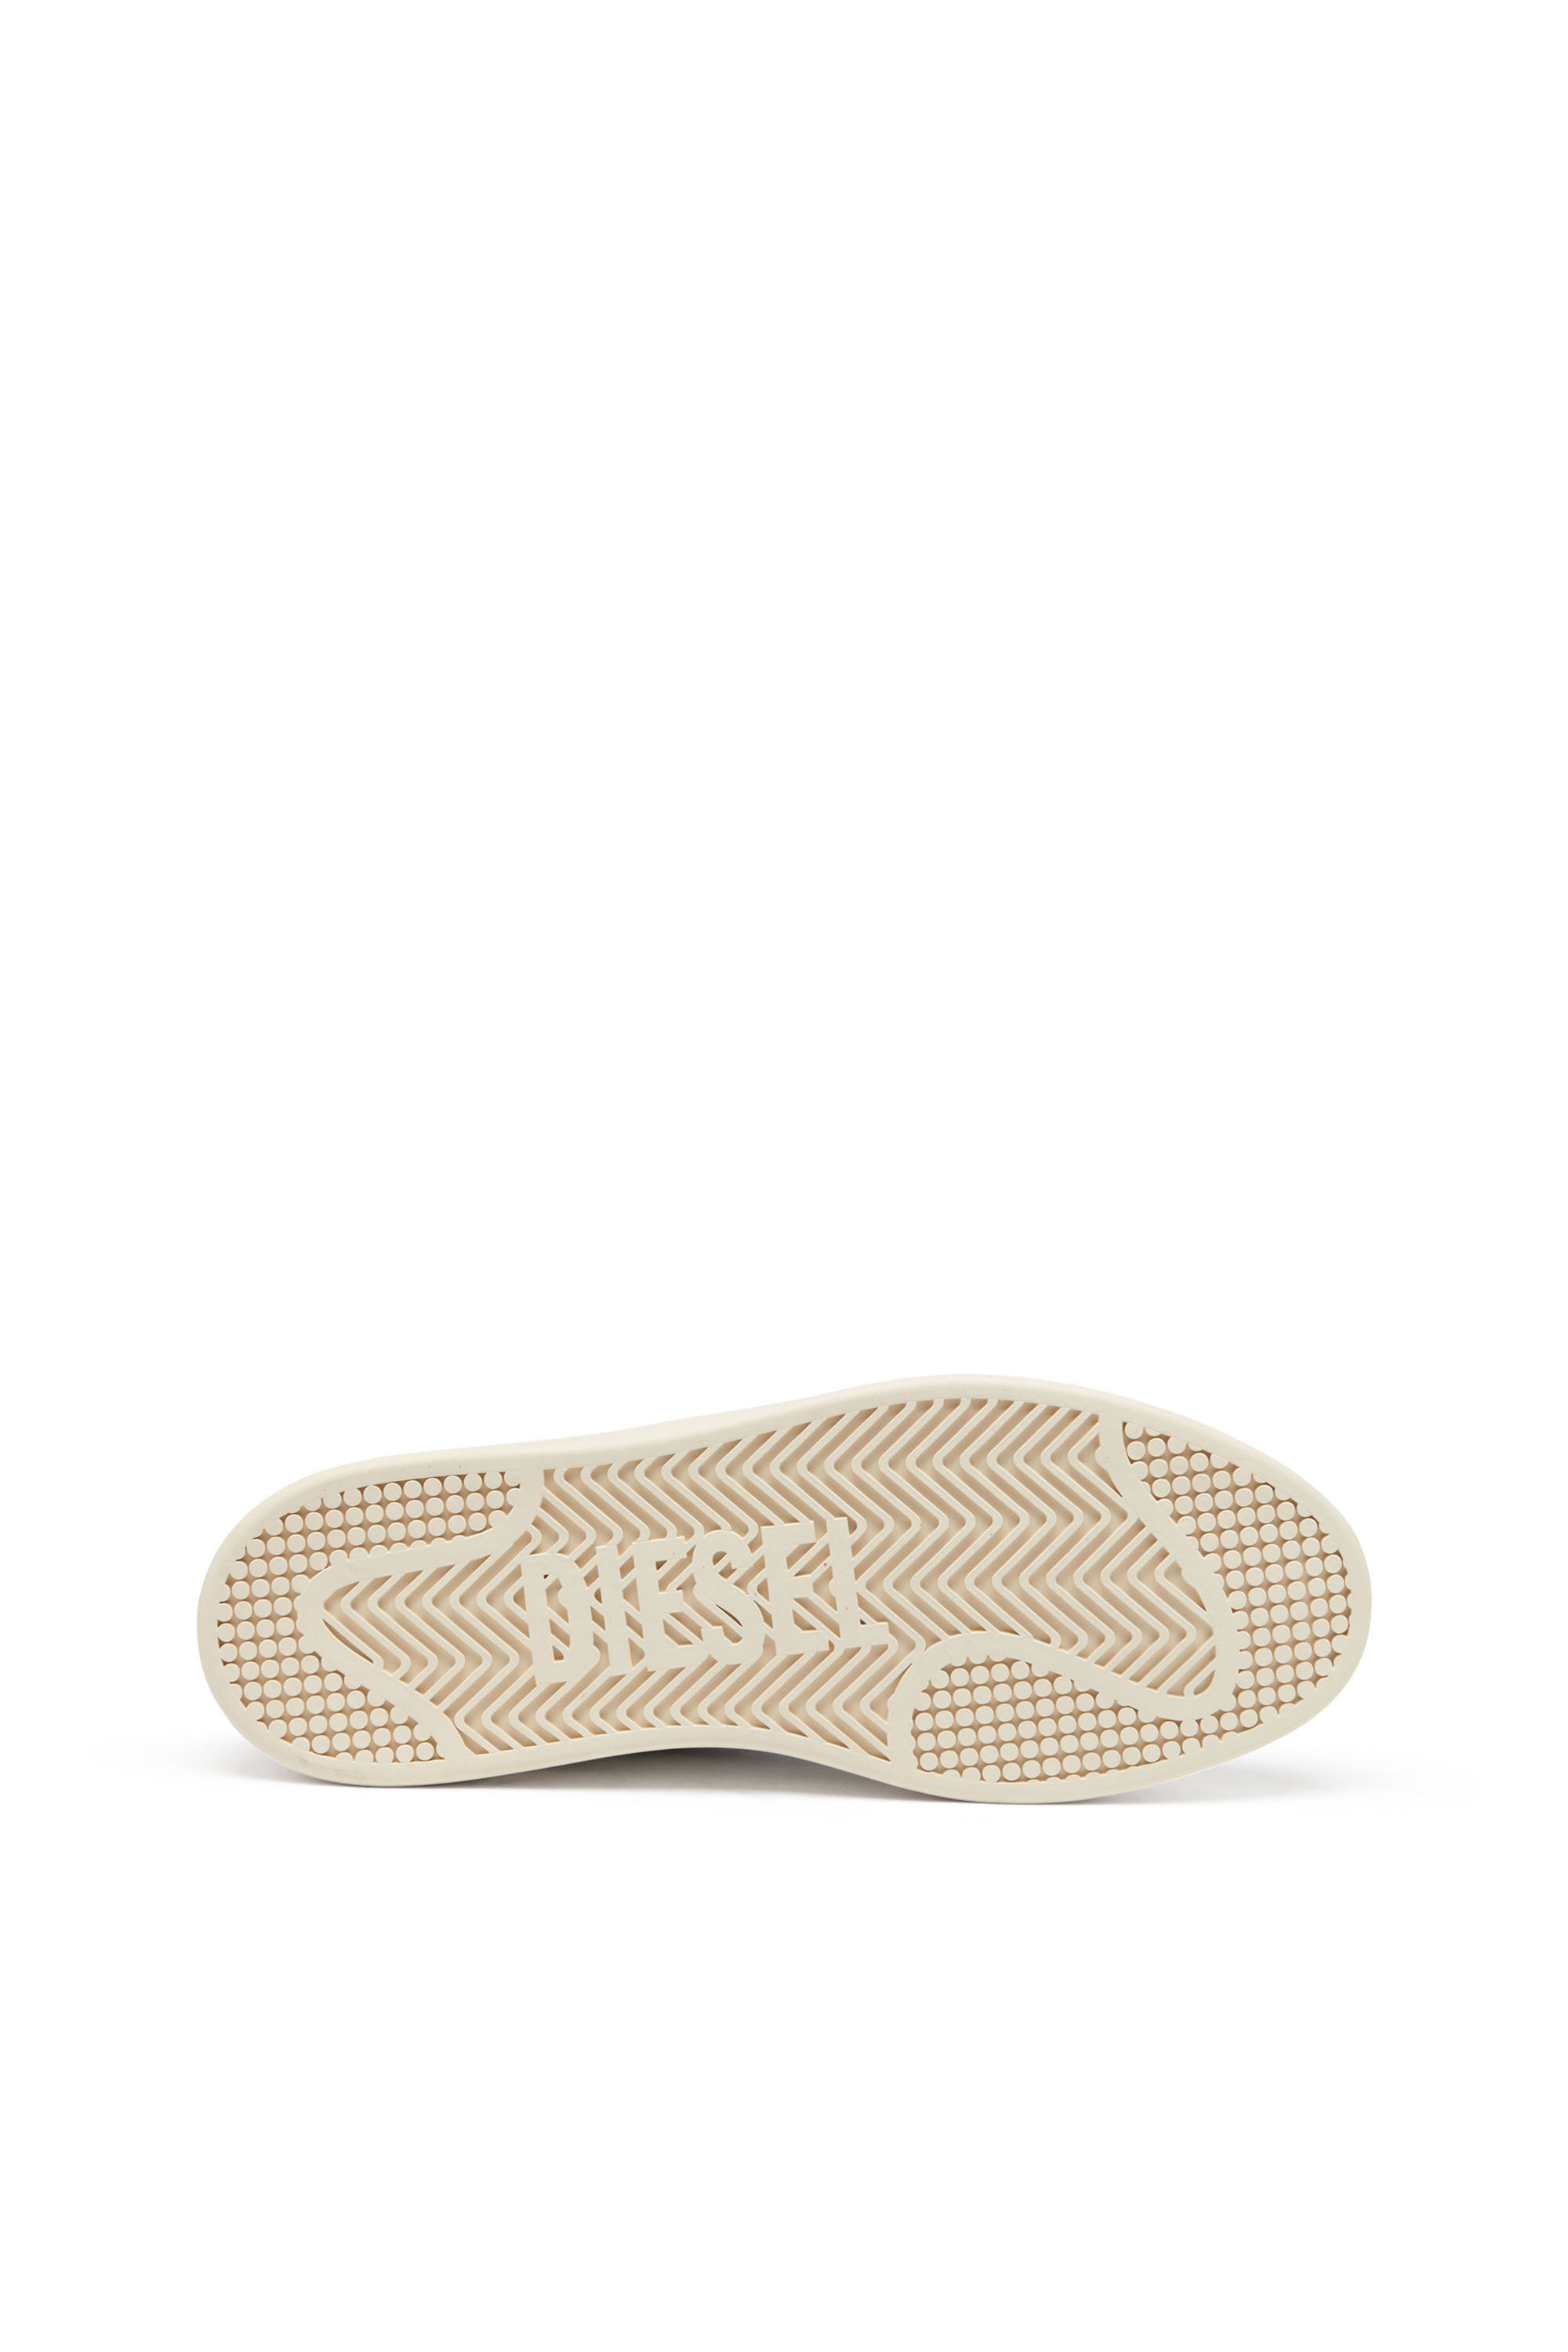 Diesel - S-ATHENE VTG, Man S-Athene-Retro sneakers in perforated leather in Multicolor - Image 5